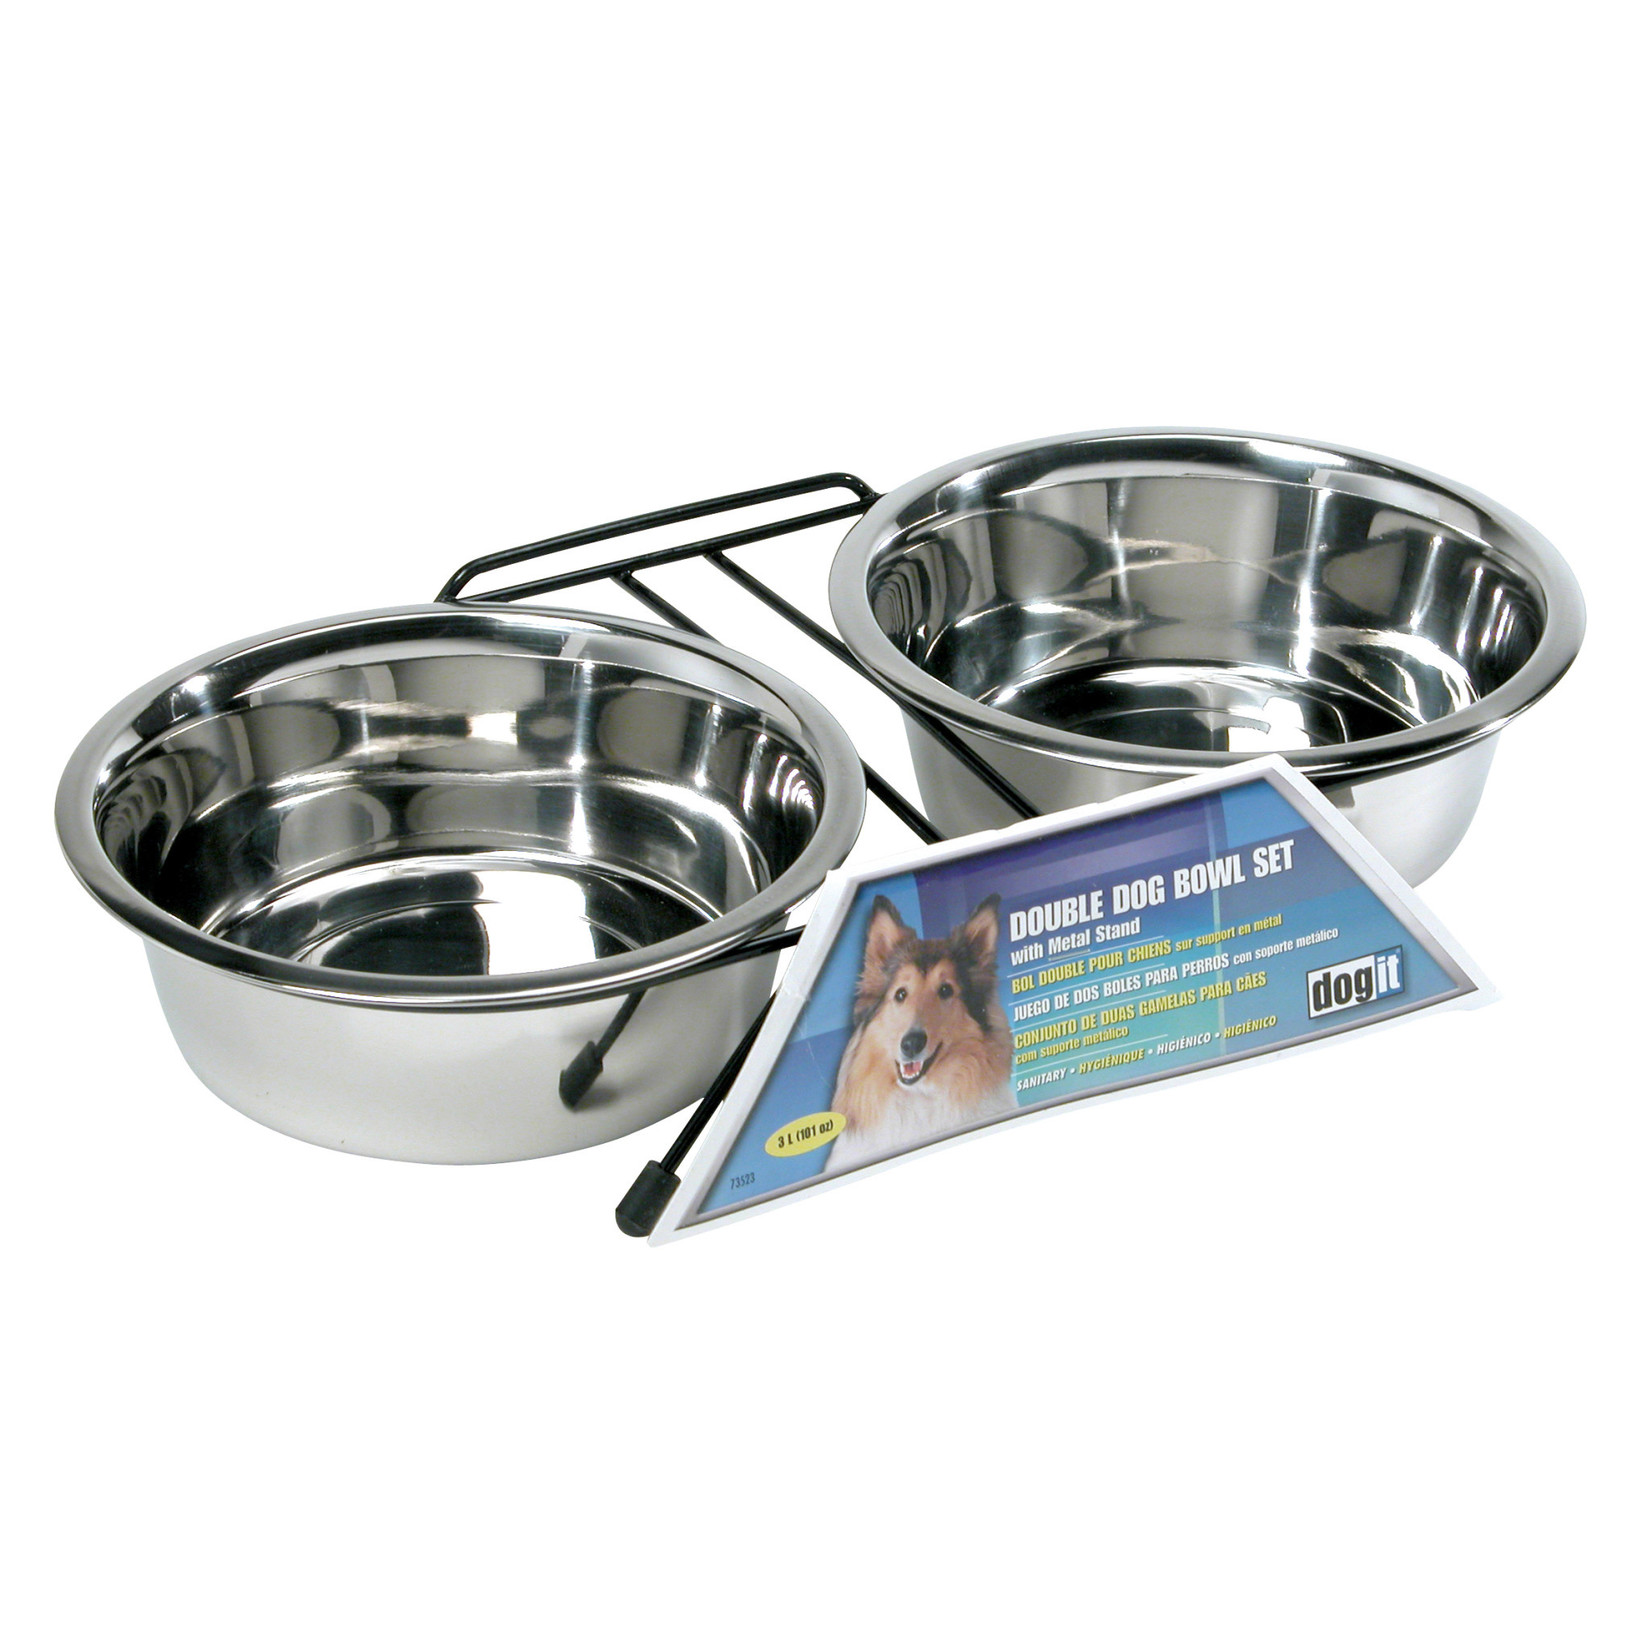 DOG IT Dogit Stainless Steel Double Dog Diner, Large - with 2 x 1.5L (50 fl oz) bowls and stand